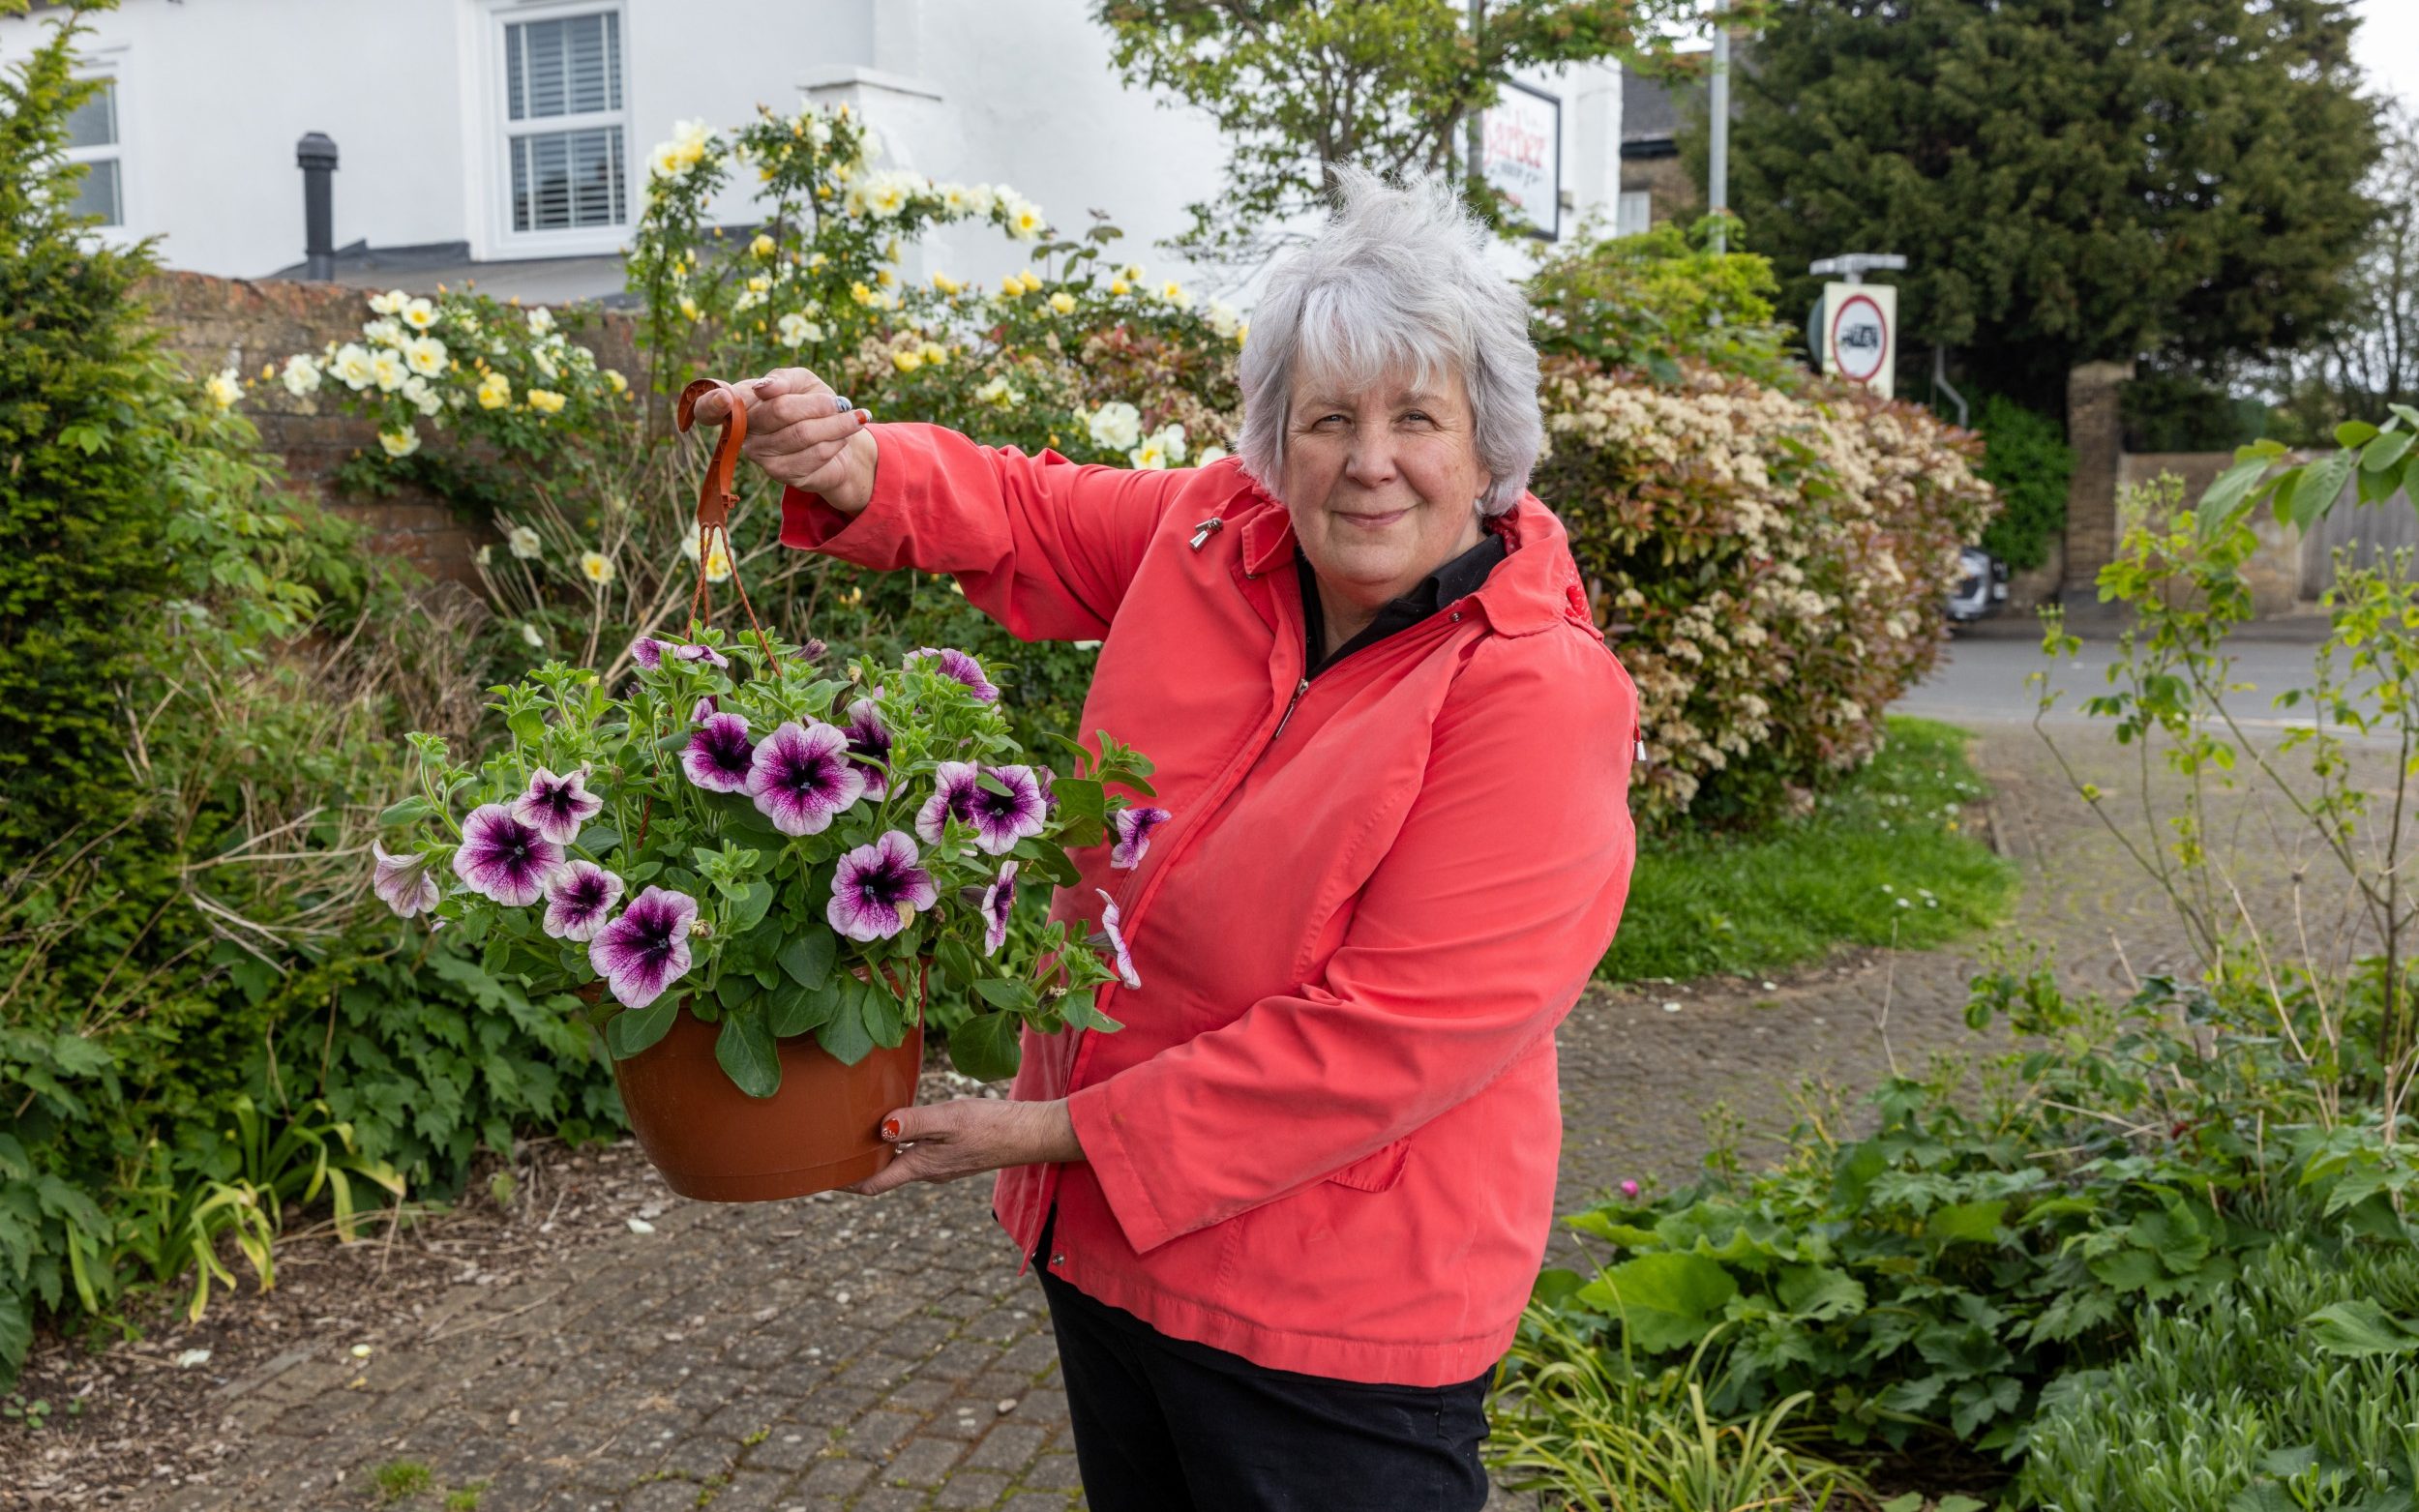 take £300 health and safety course before installing hanging baskets, council tells volunteers